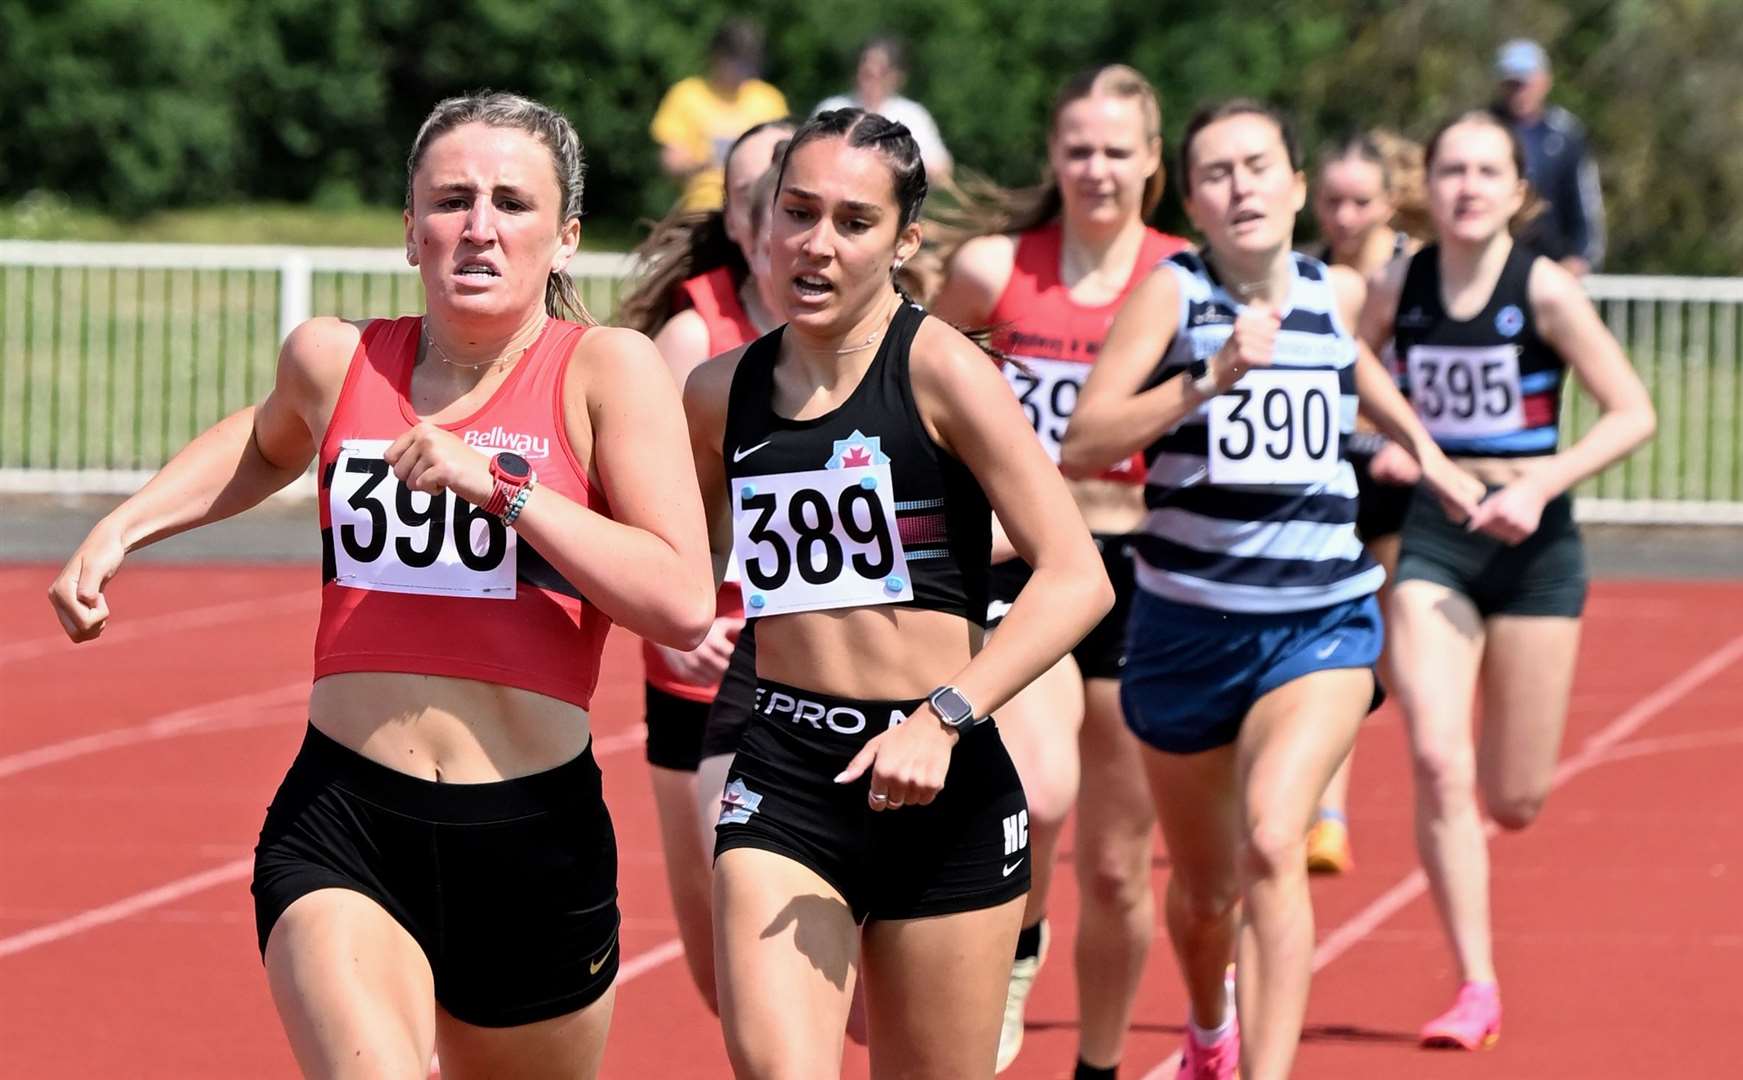 The Under-20 Women’s 800m final saw Medway & Maidstone’s Lola Sutton (396) win ahead of second-placed Hannah Clark (389) from Blackheath & Bromley Harriers AC. Picture: Simon Hildrew